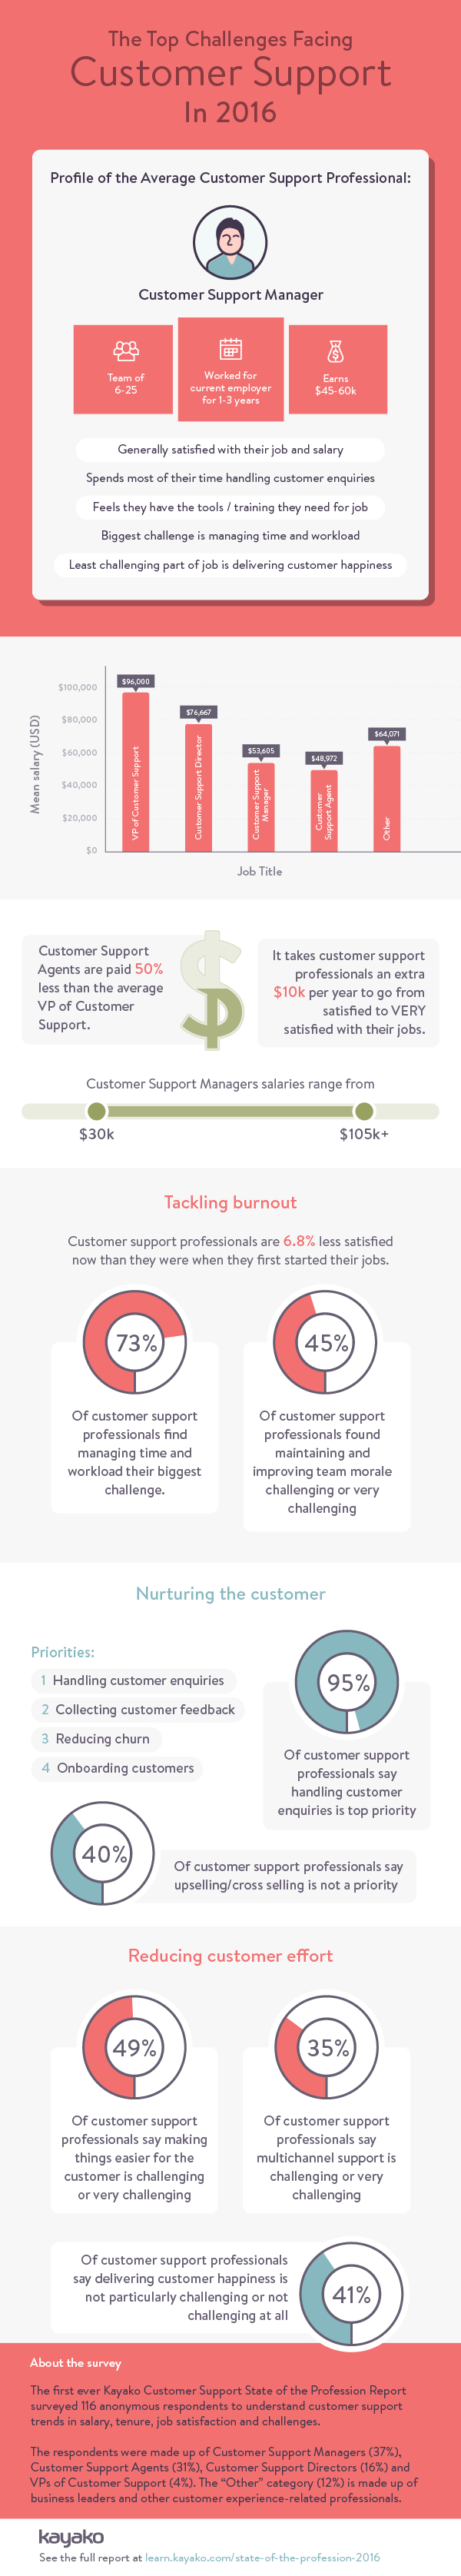 4 Must-Read Stats on the State of Customer Support in 2016 [New Research]